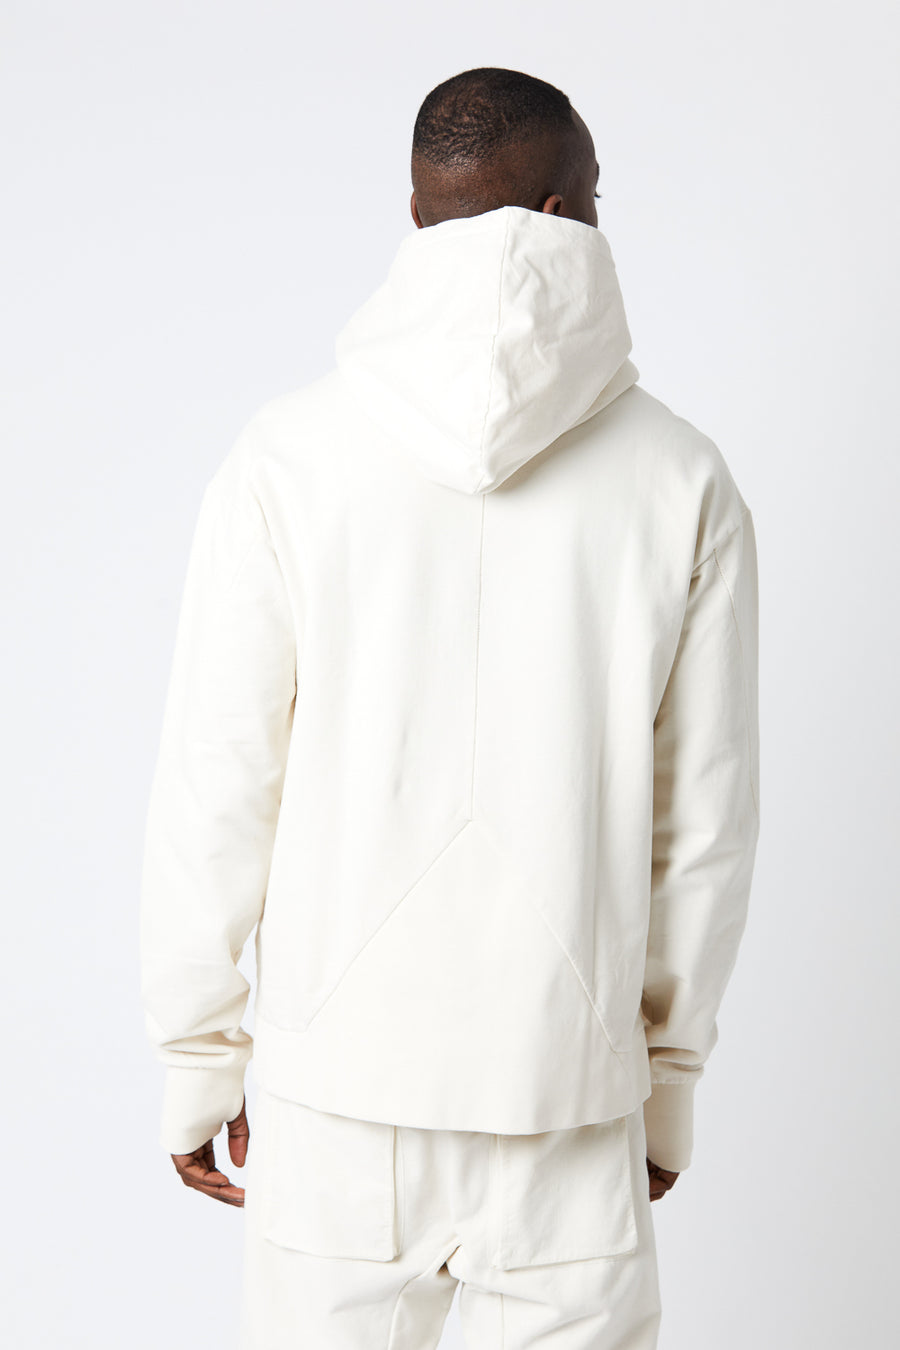 Buy the Thom Krom M S 134 Hoodie in Bone at Intro. Spend £50 for free UK delivery. Official stockists. We ship worldwide.